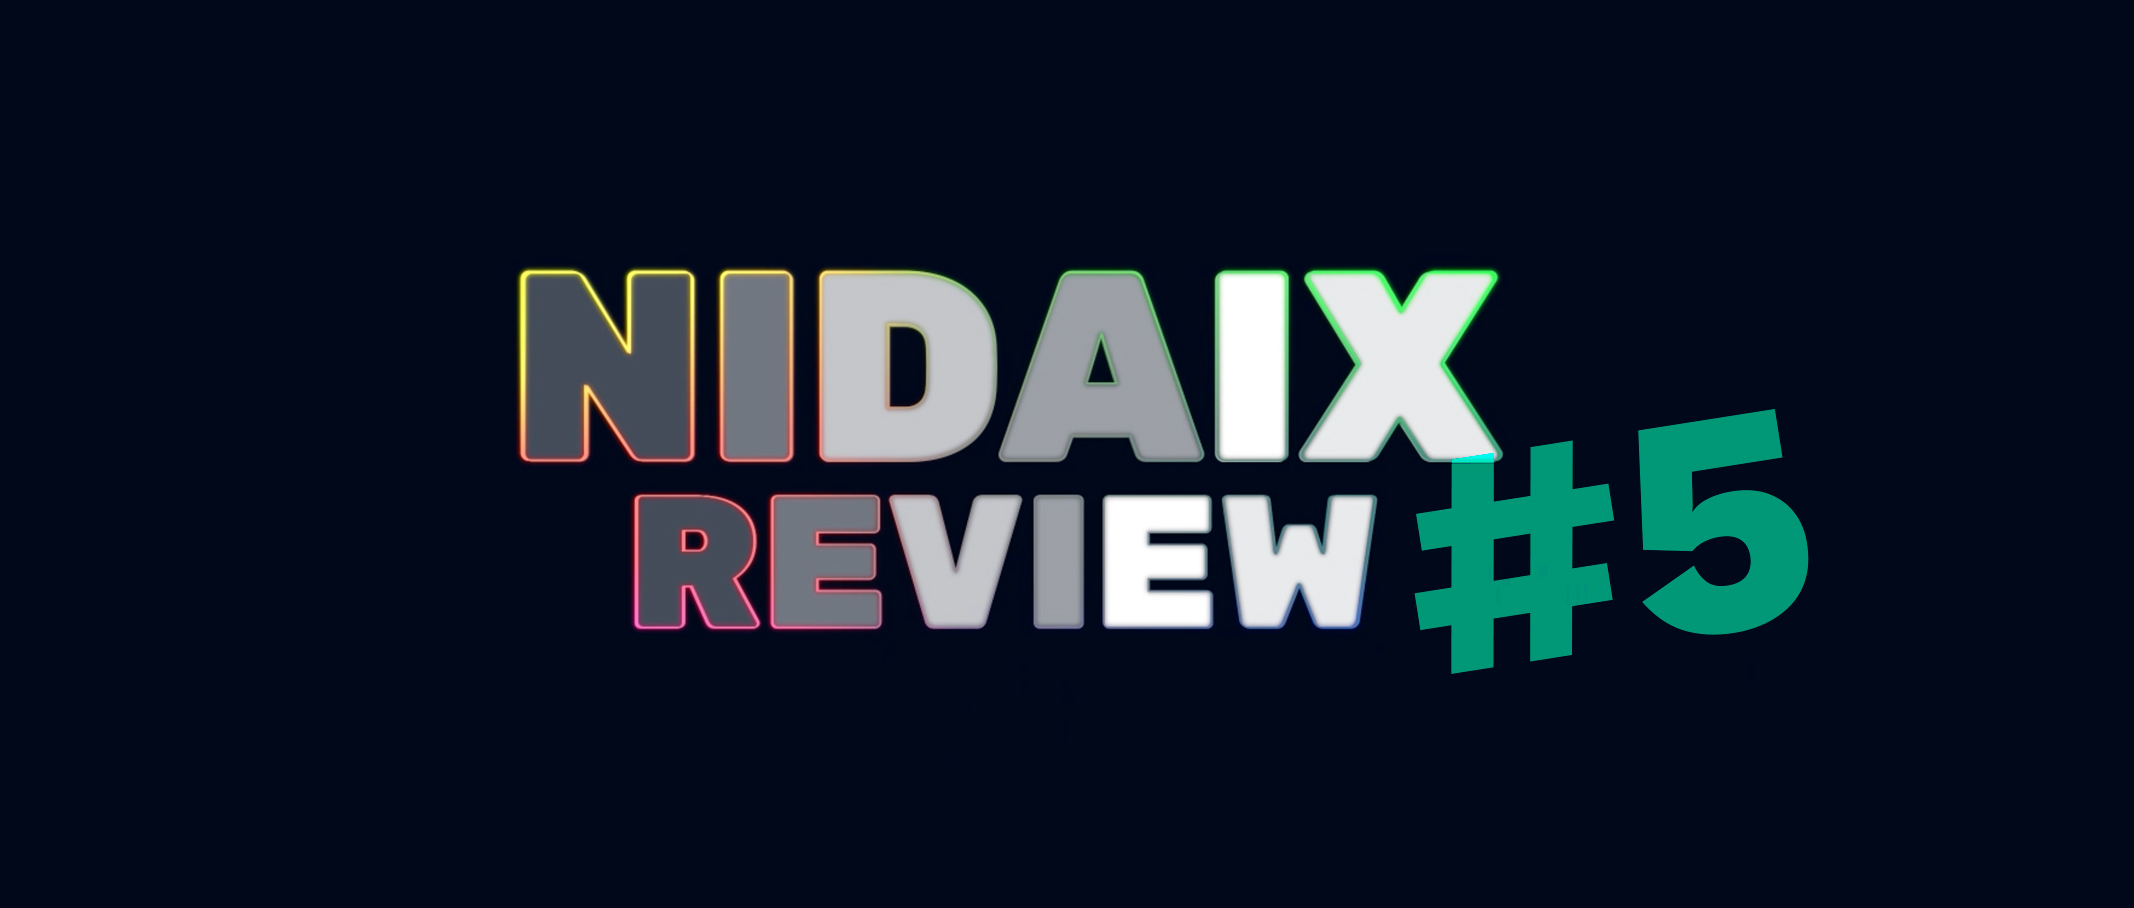 NIDAIX REVIEW #5